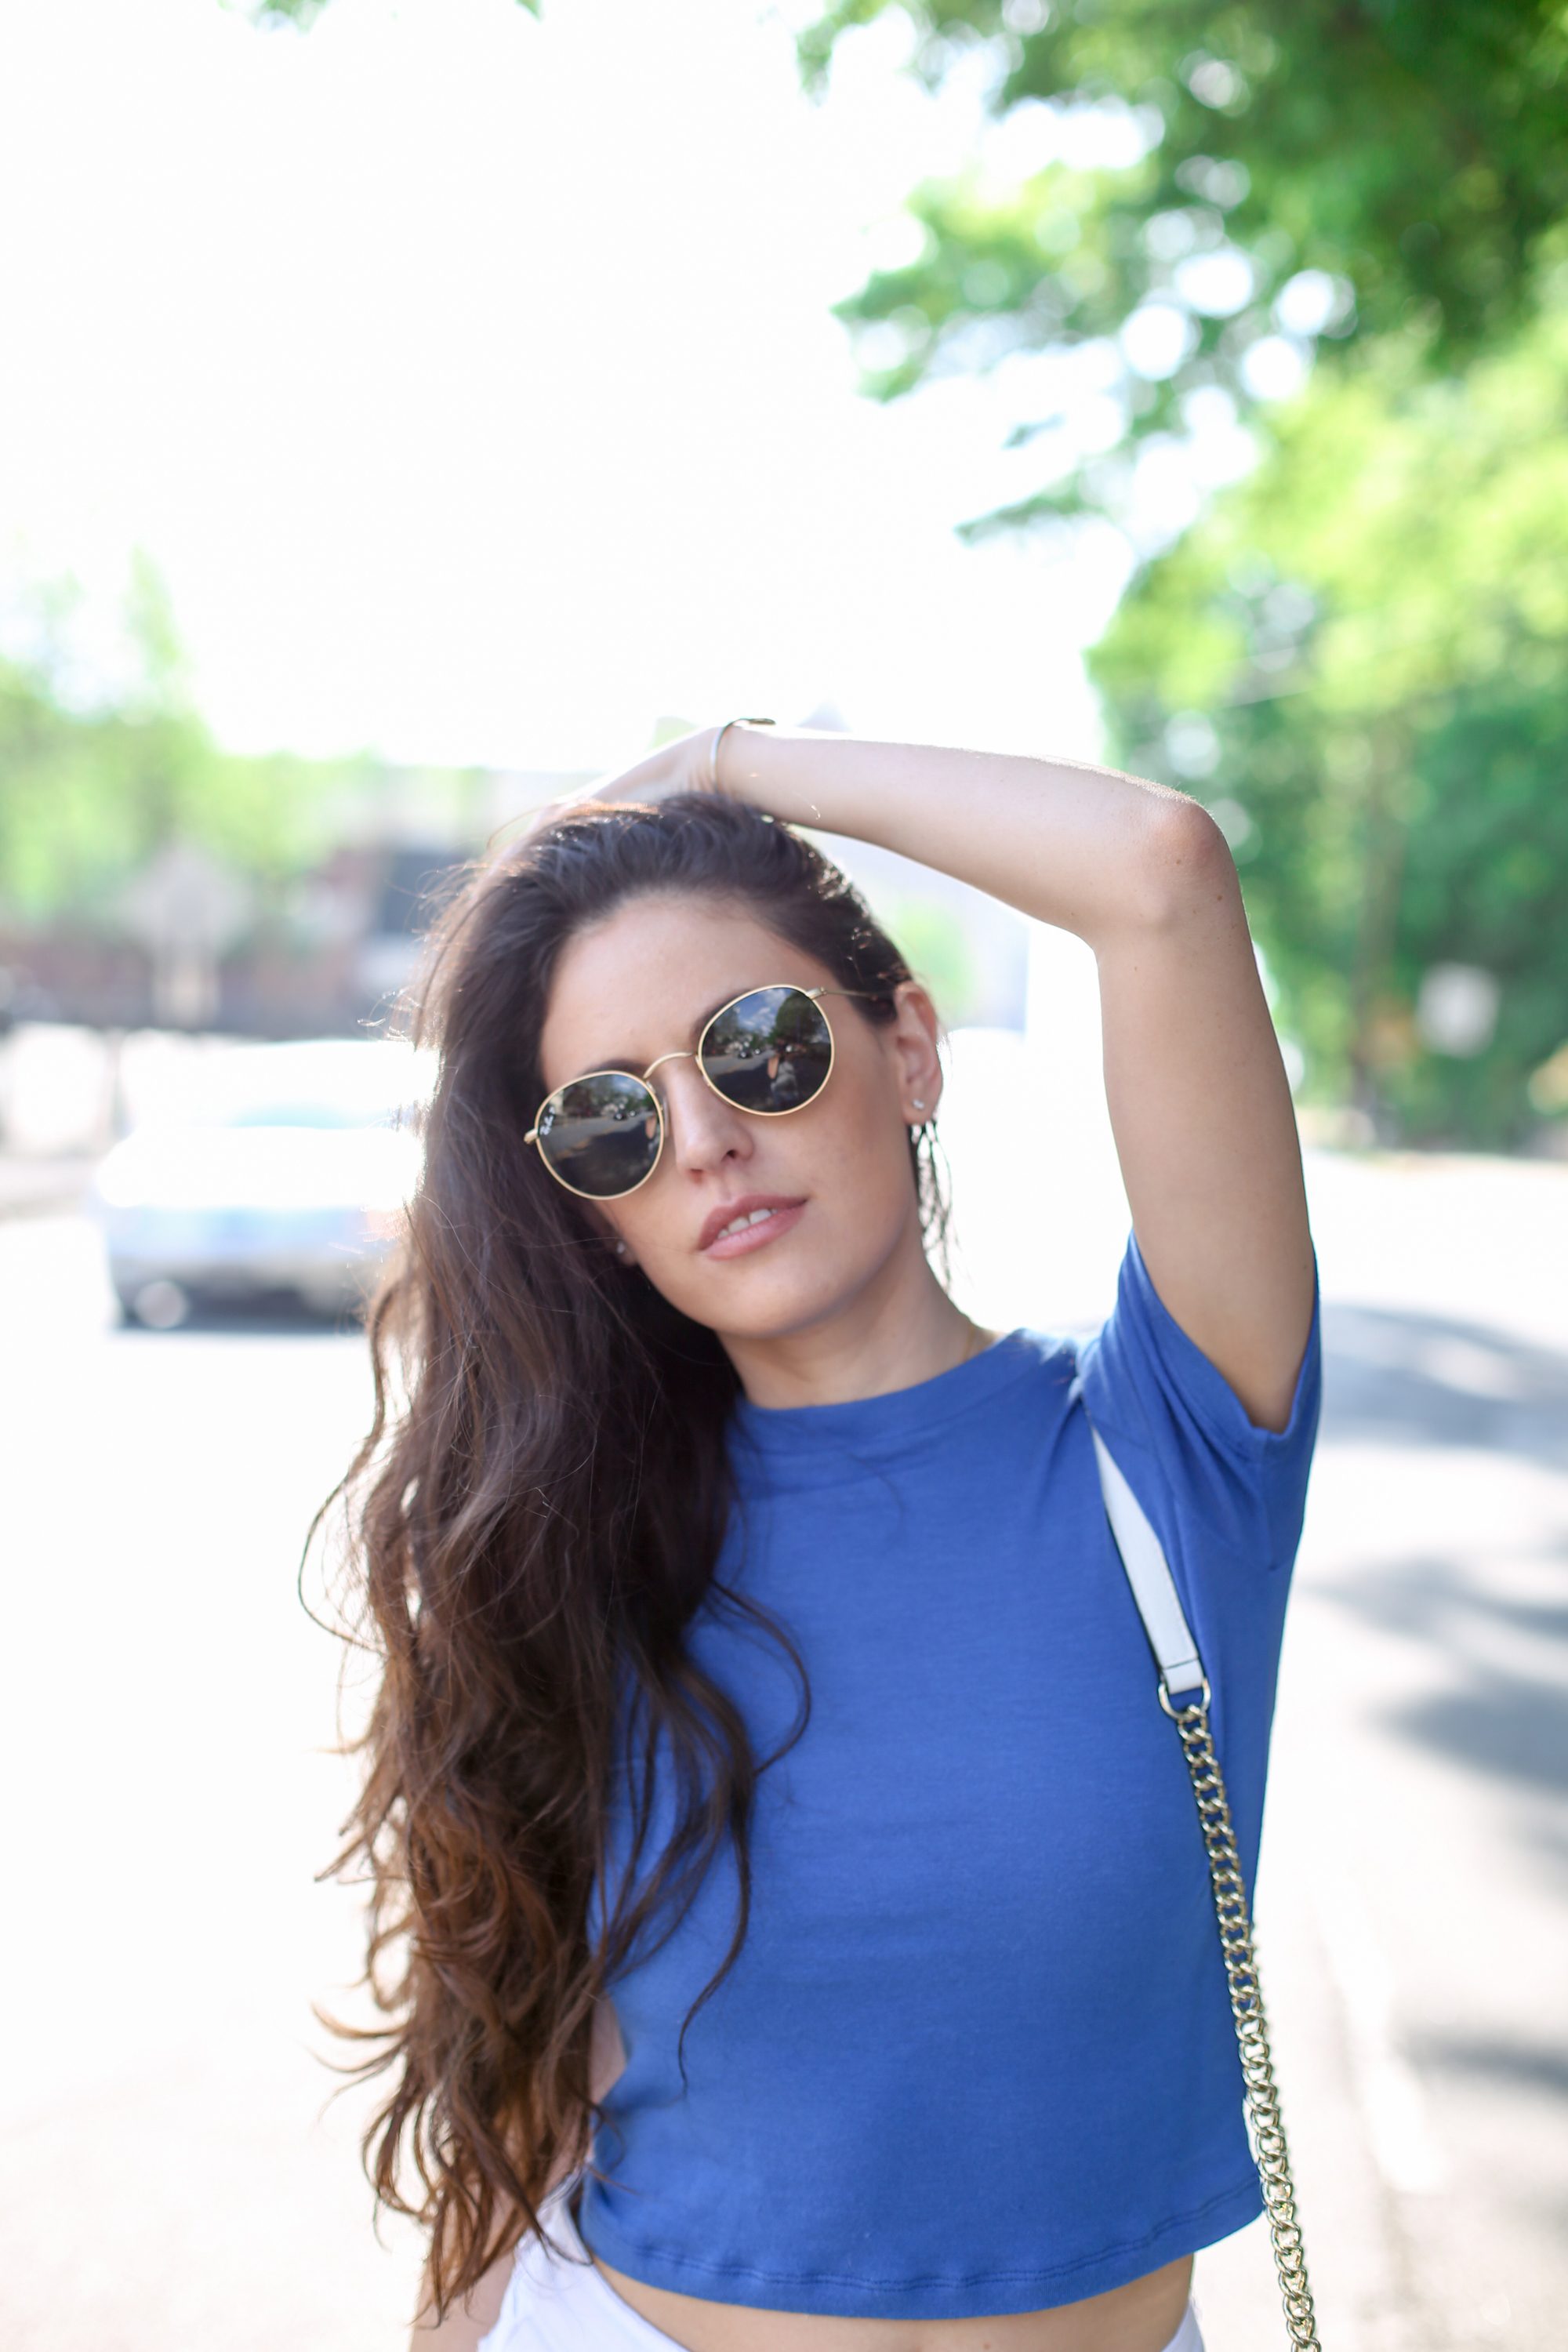 palm print shoes, royal blue crop top, summer style, summer outfit ideas, round raybans